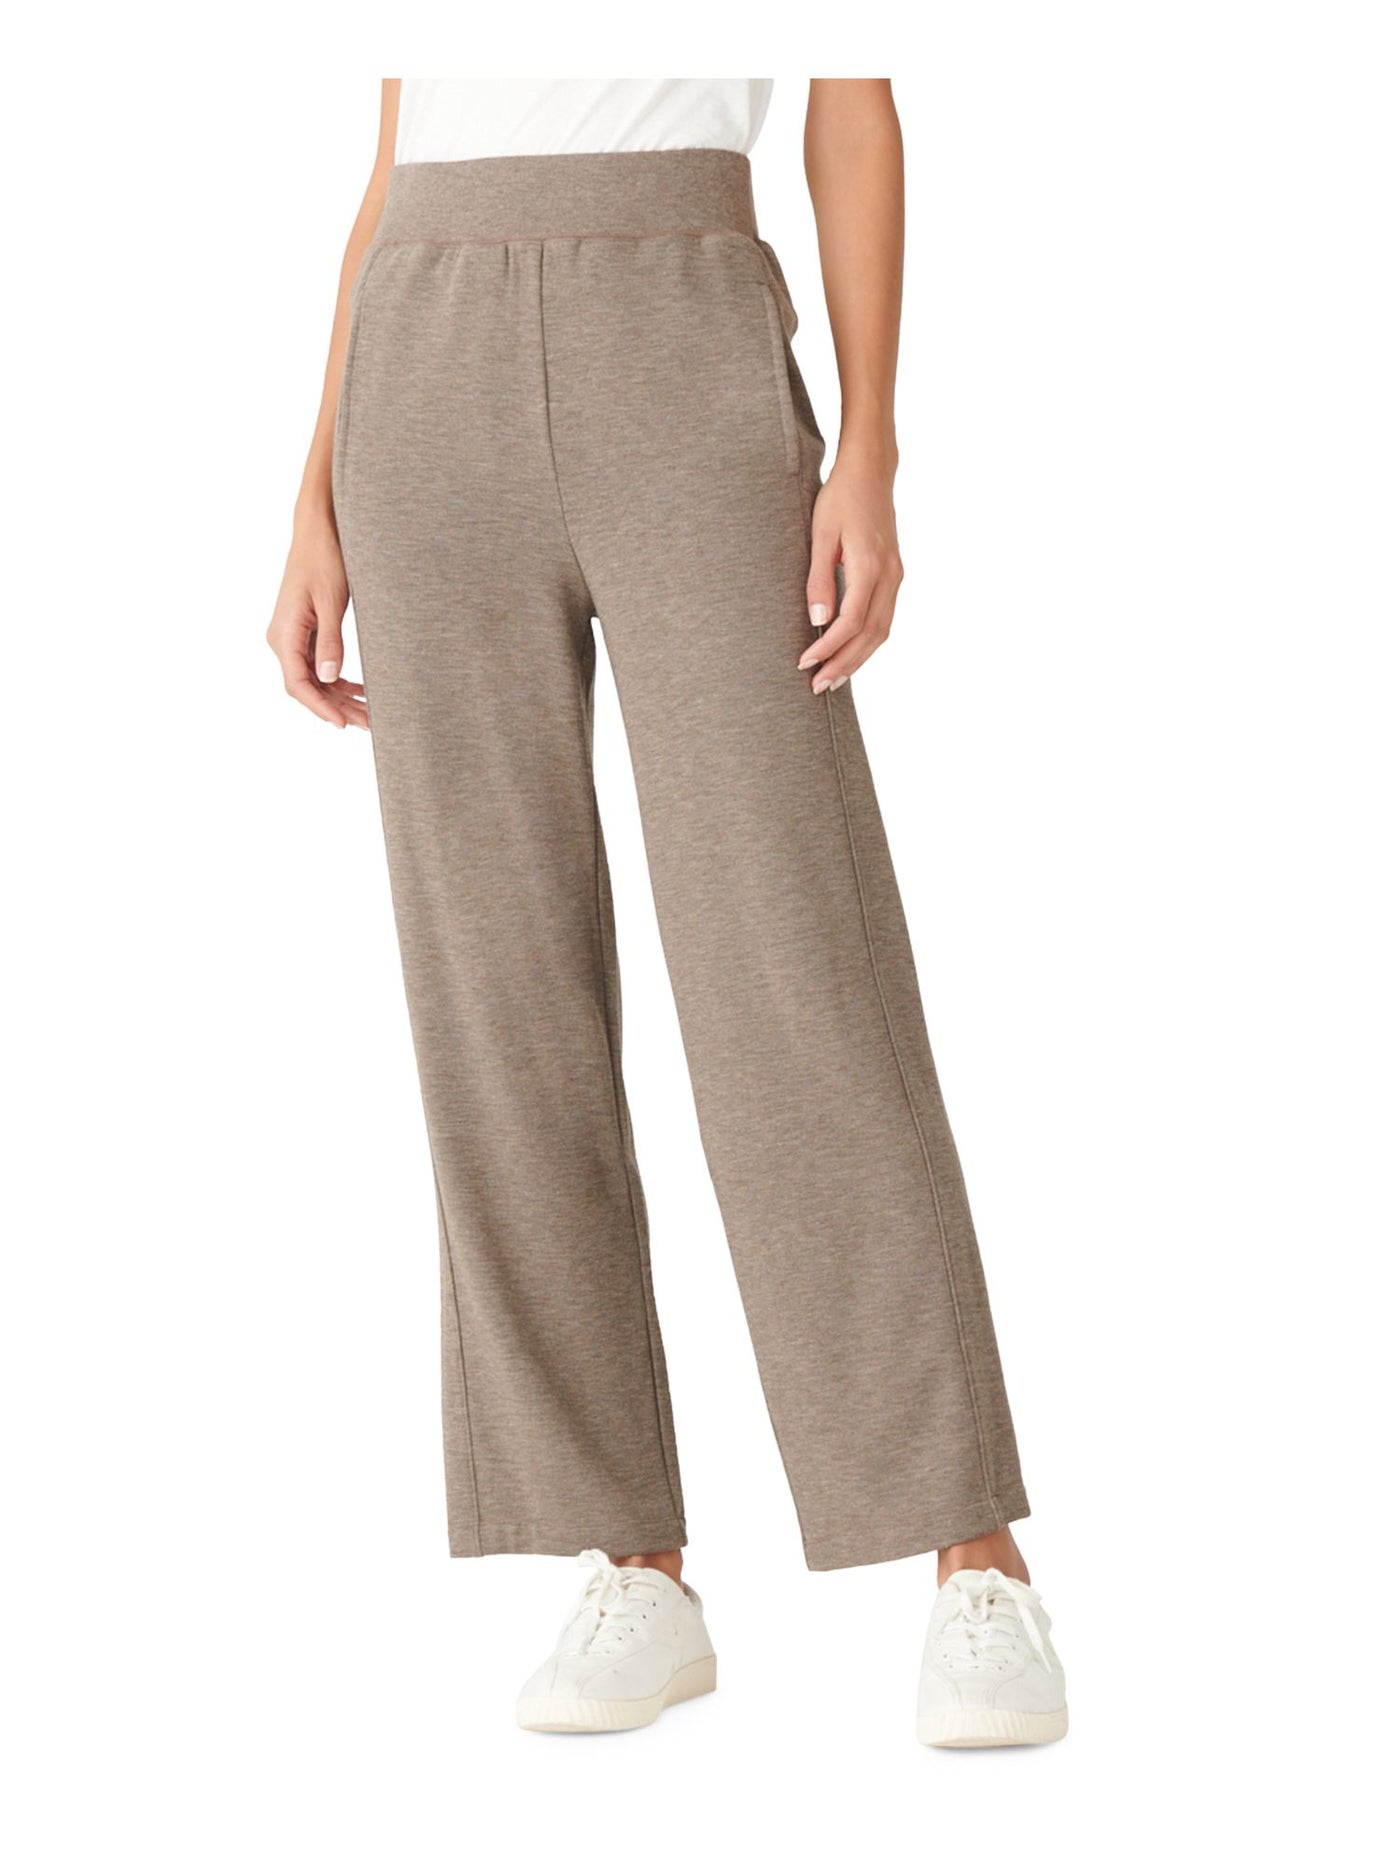 LUCKY BRAND Womens Brown Pocketed Pull-on Sweatpants Heather Cropped Pants S